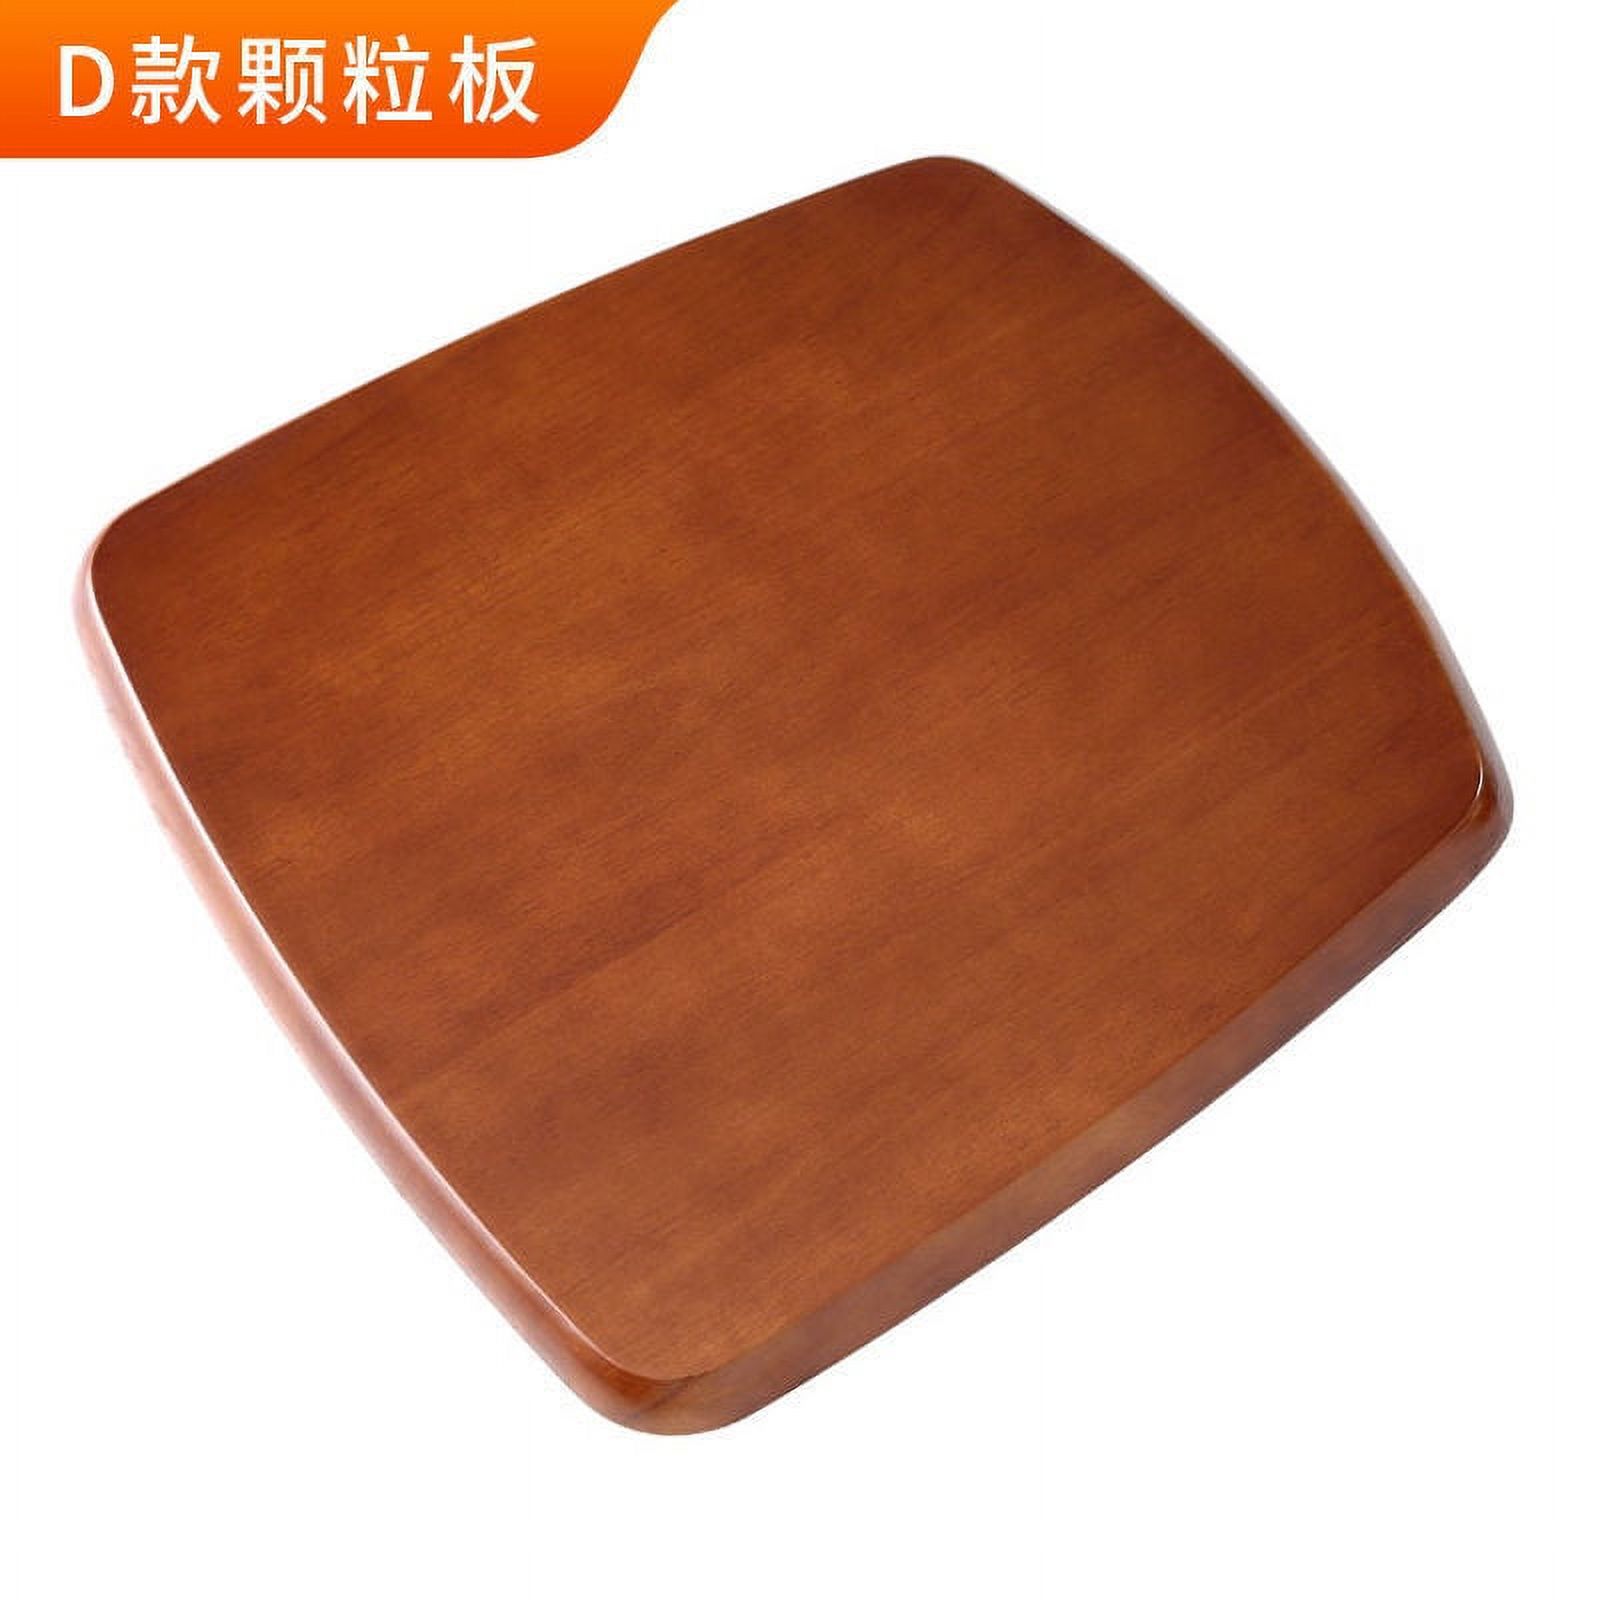 HEMOTON Wooden Chair Seat Replacement Wooden Dining Chair Cover Wooden Step  Stool Cover Chair Seat Cover 